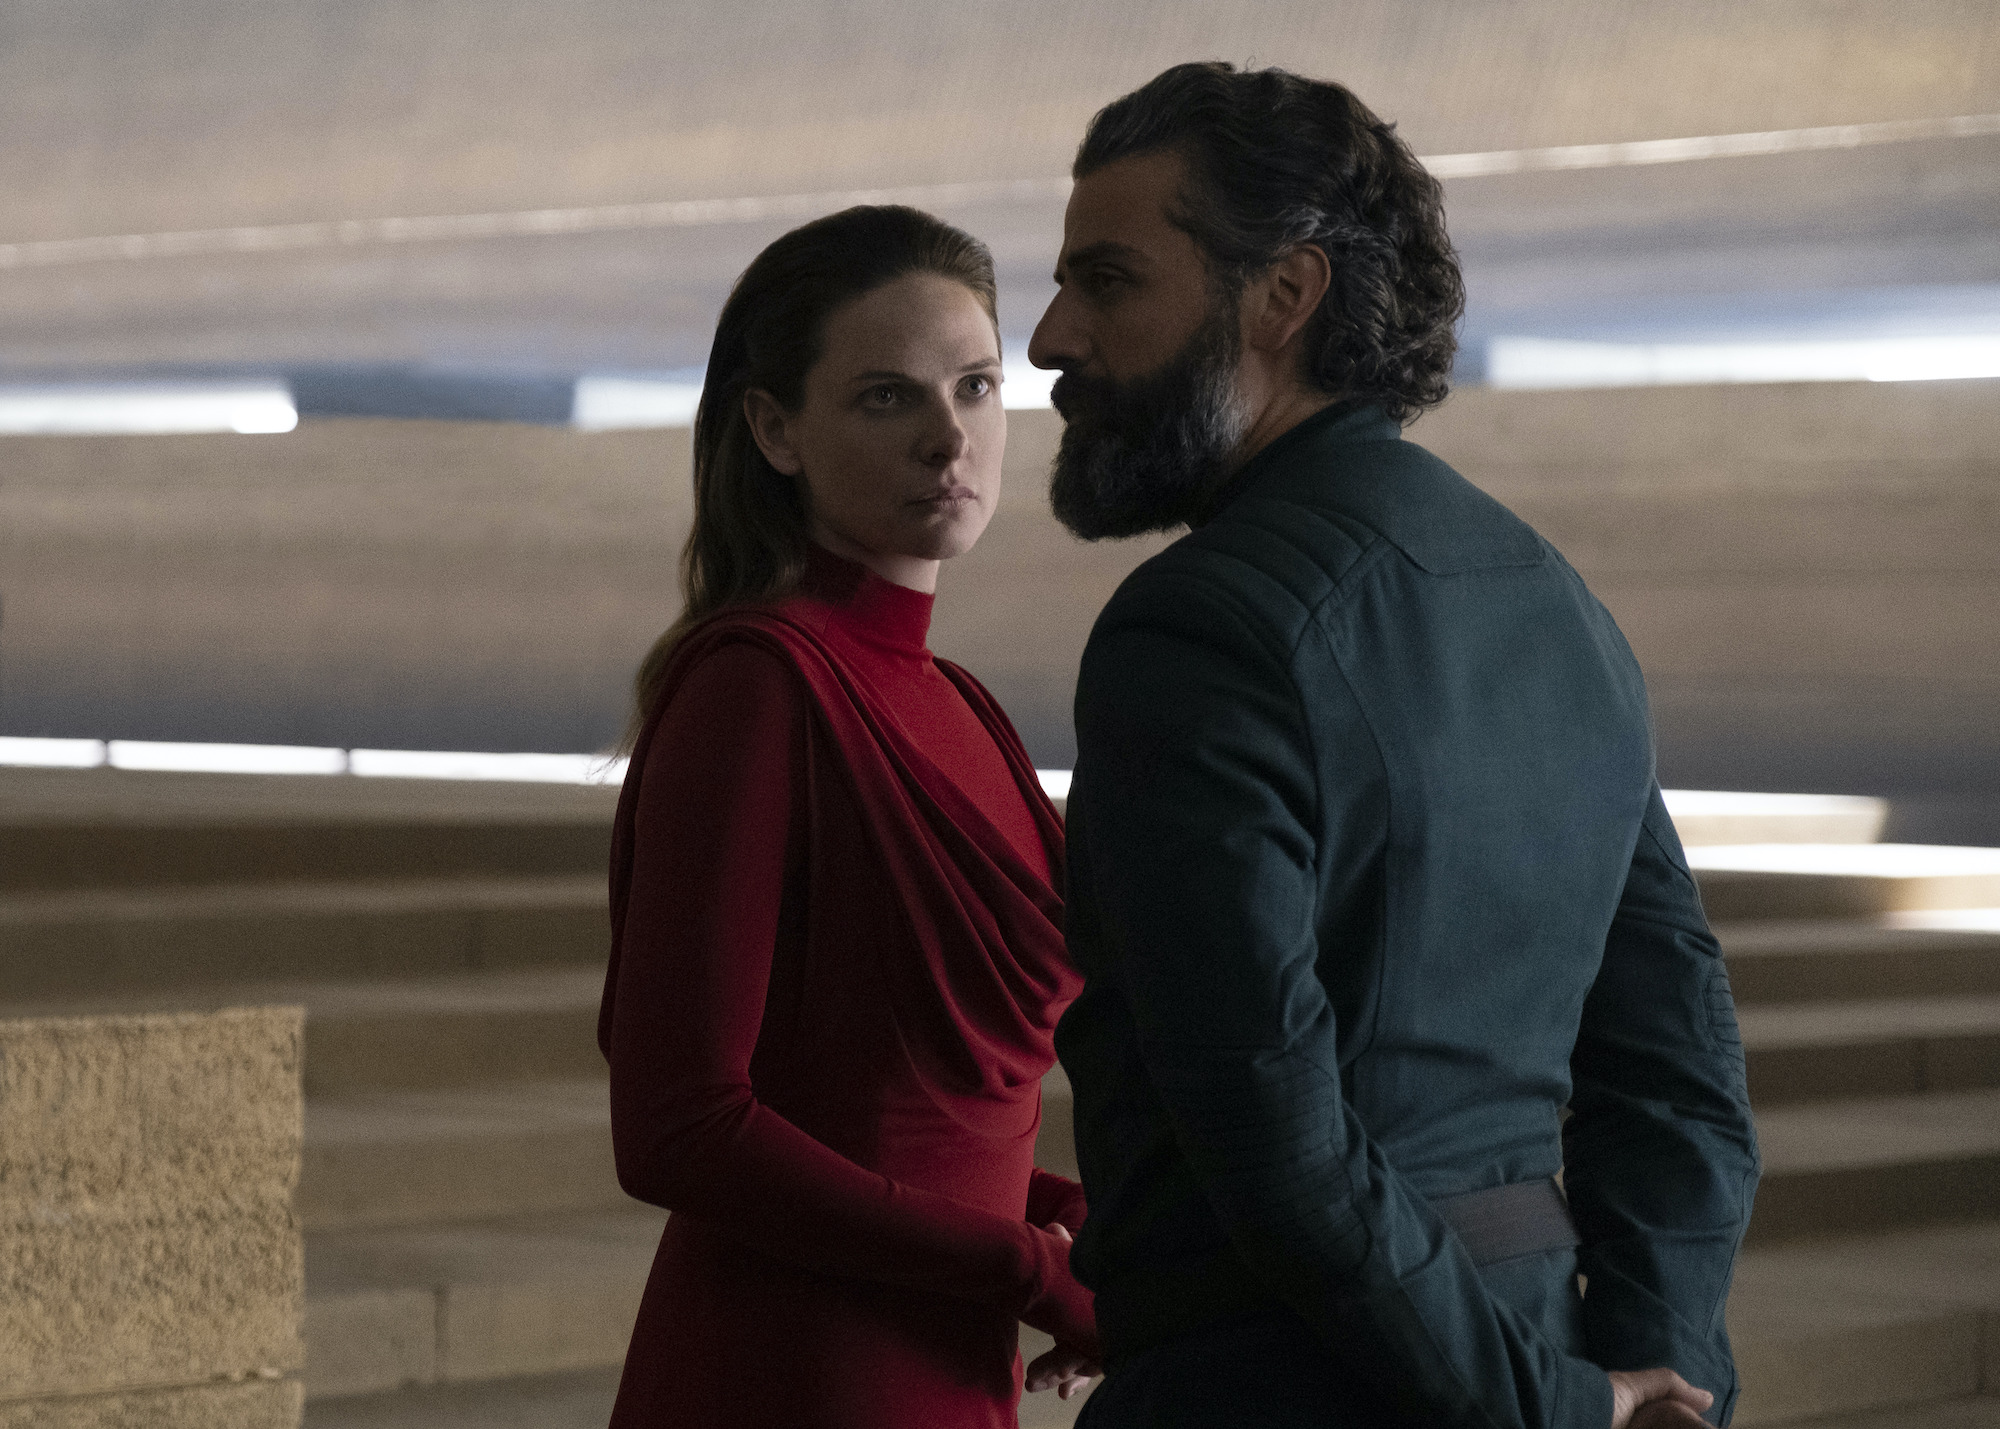 Rebecca Ferguson as Lady Jessica and Oscar Isaac as Duke Leto Atreides in 'Dune.' They stand in a room made of tan stone floors and walls with the sun peeking in behind them. Ferguson wears a red turtleneck dress with long sleeves. Isaac wears a dark faded blue jacket. They both look concerned.